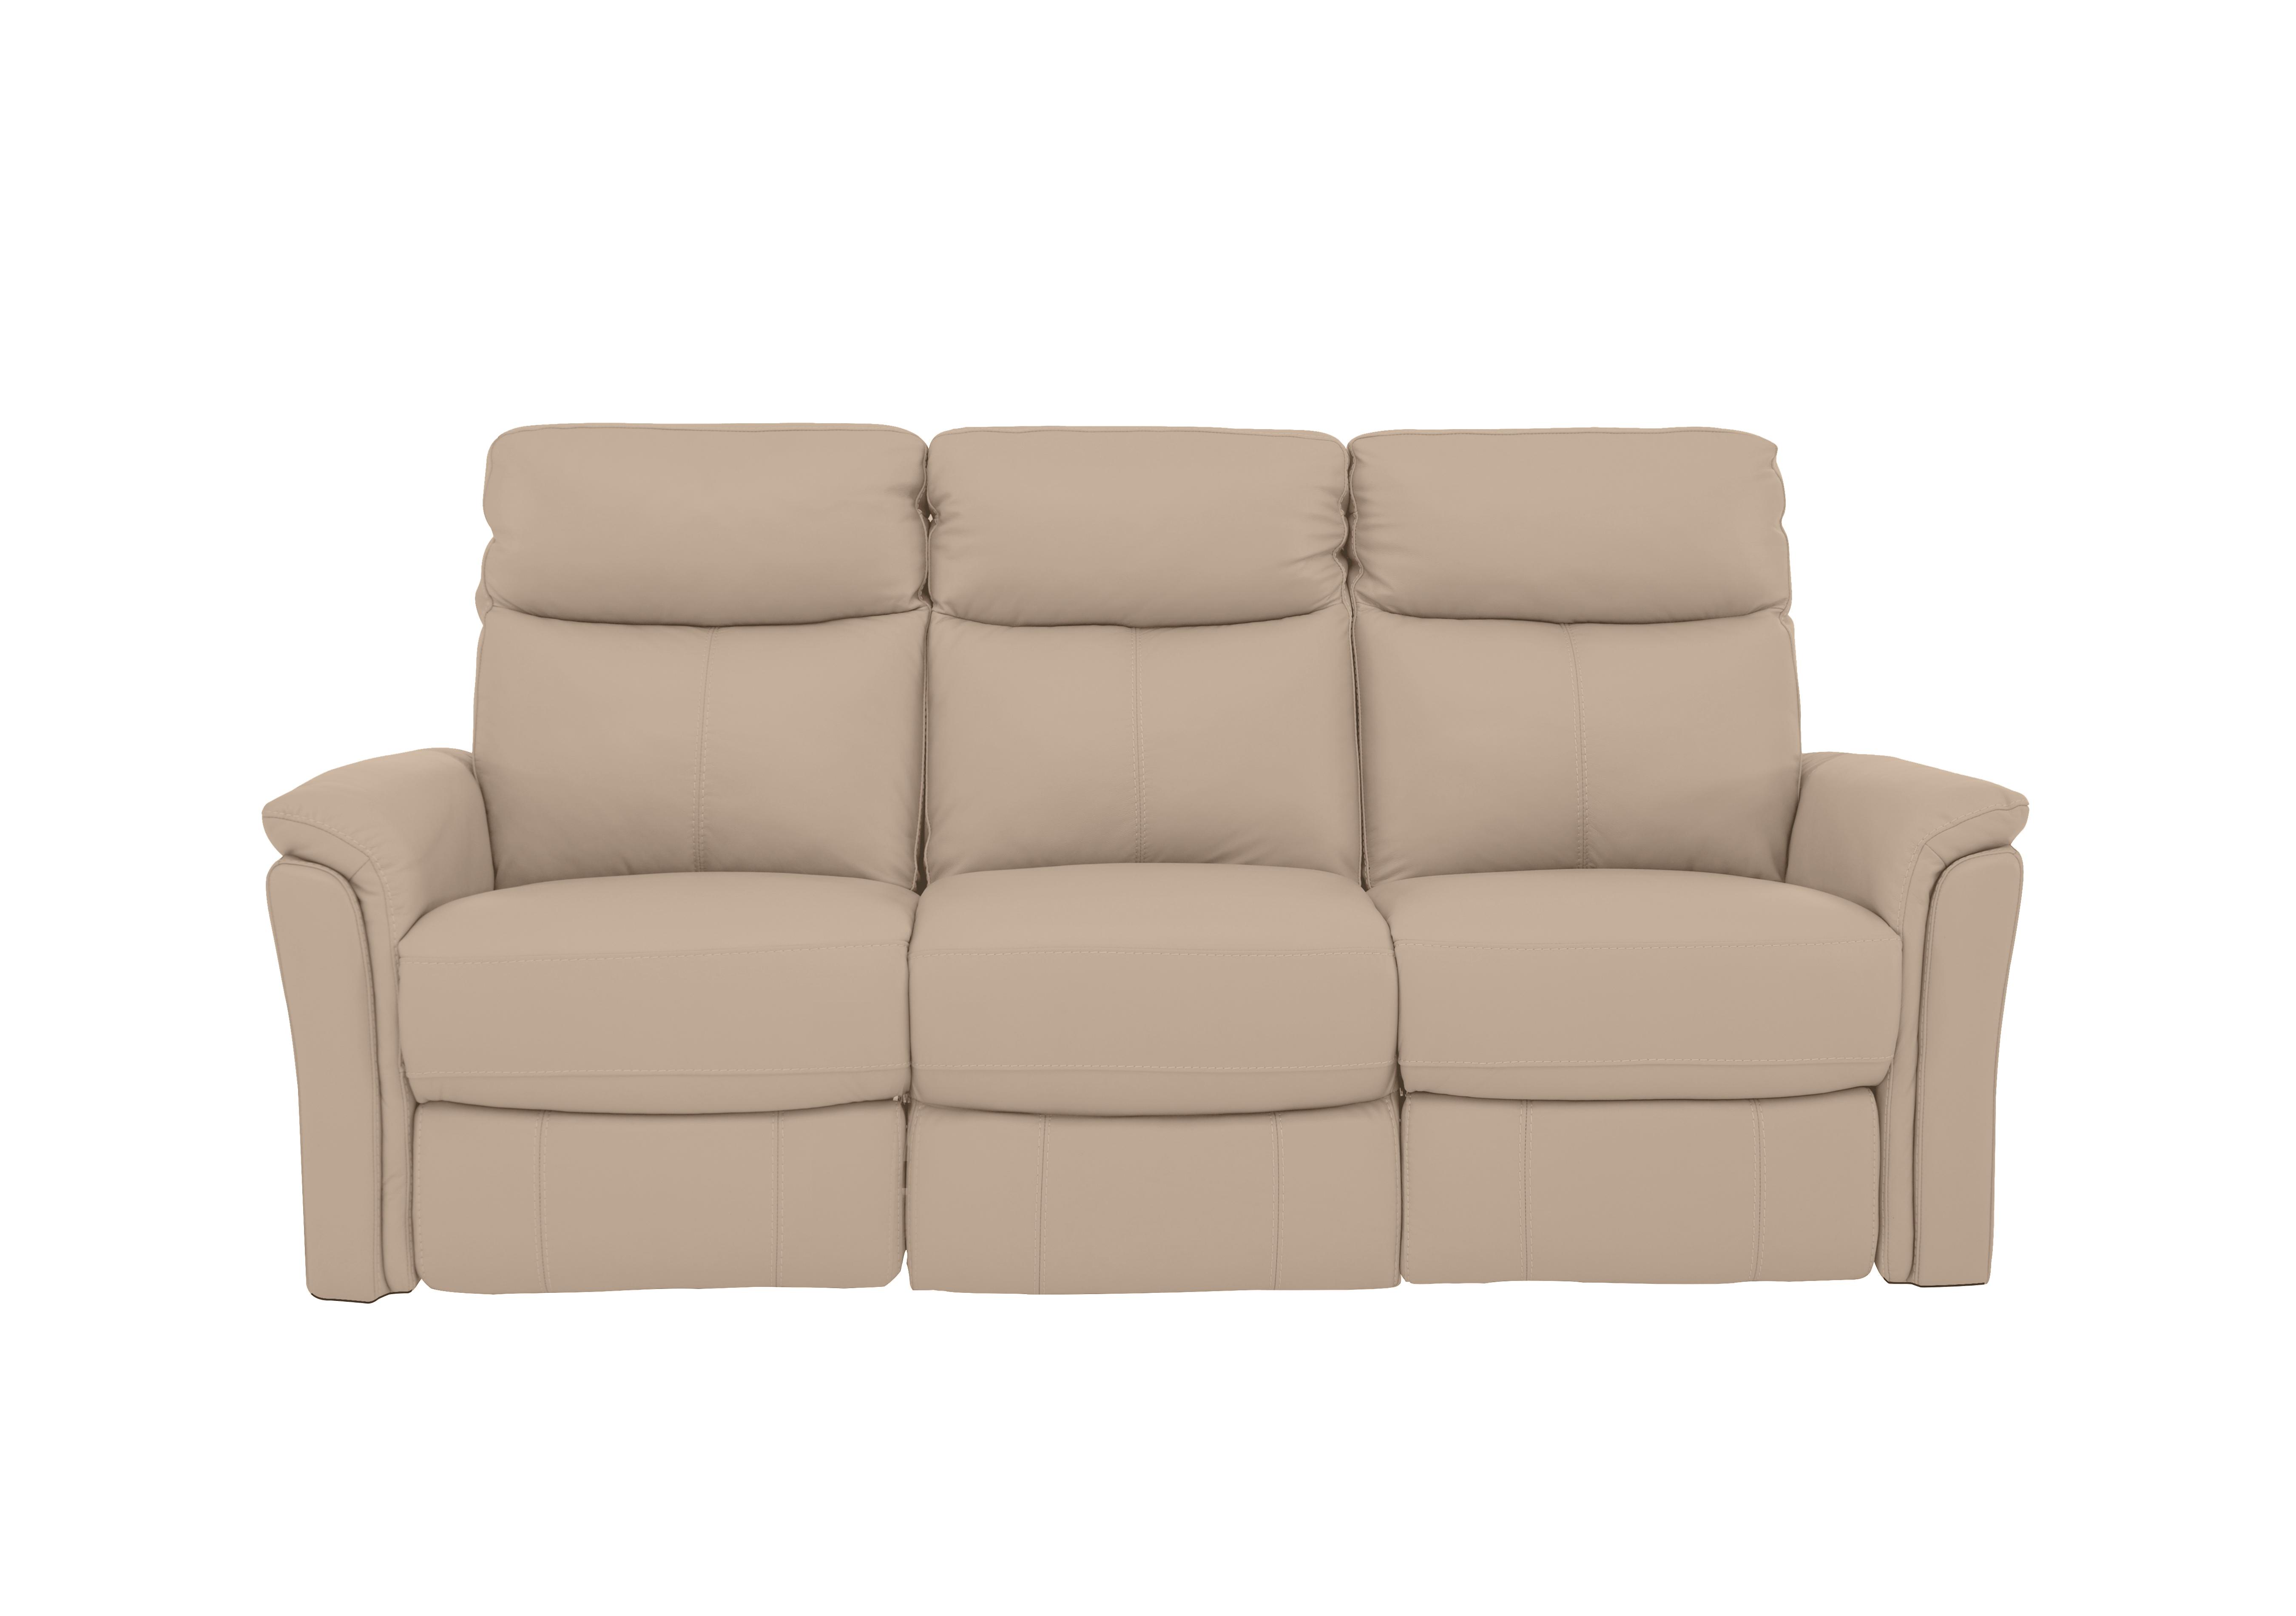 Compact Collection Piccolo 3 Seater Sofa in Bv-039c Pebble on Furniture Village